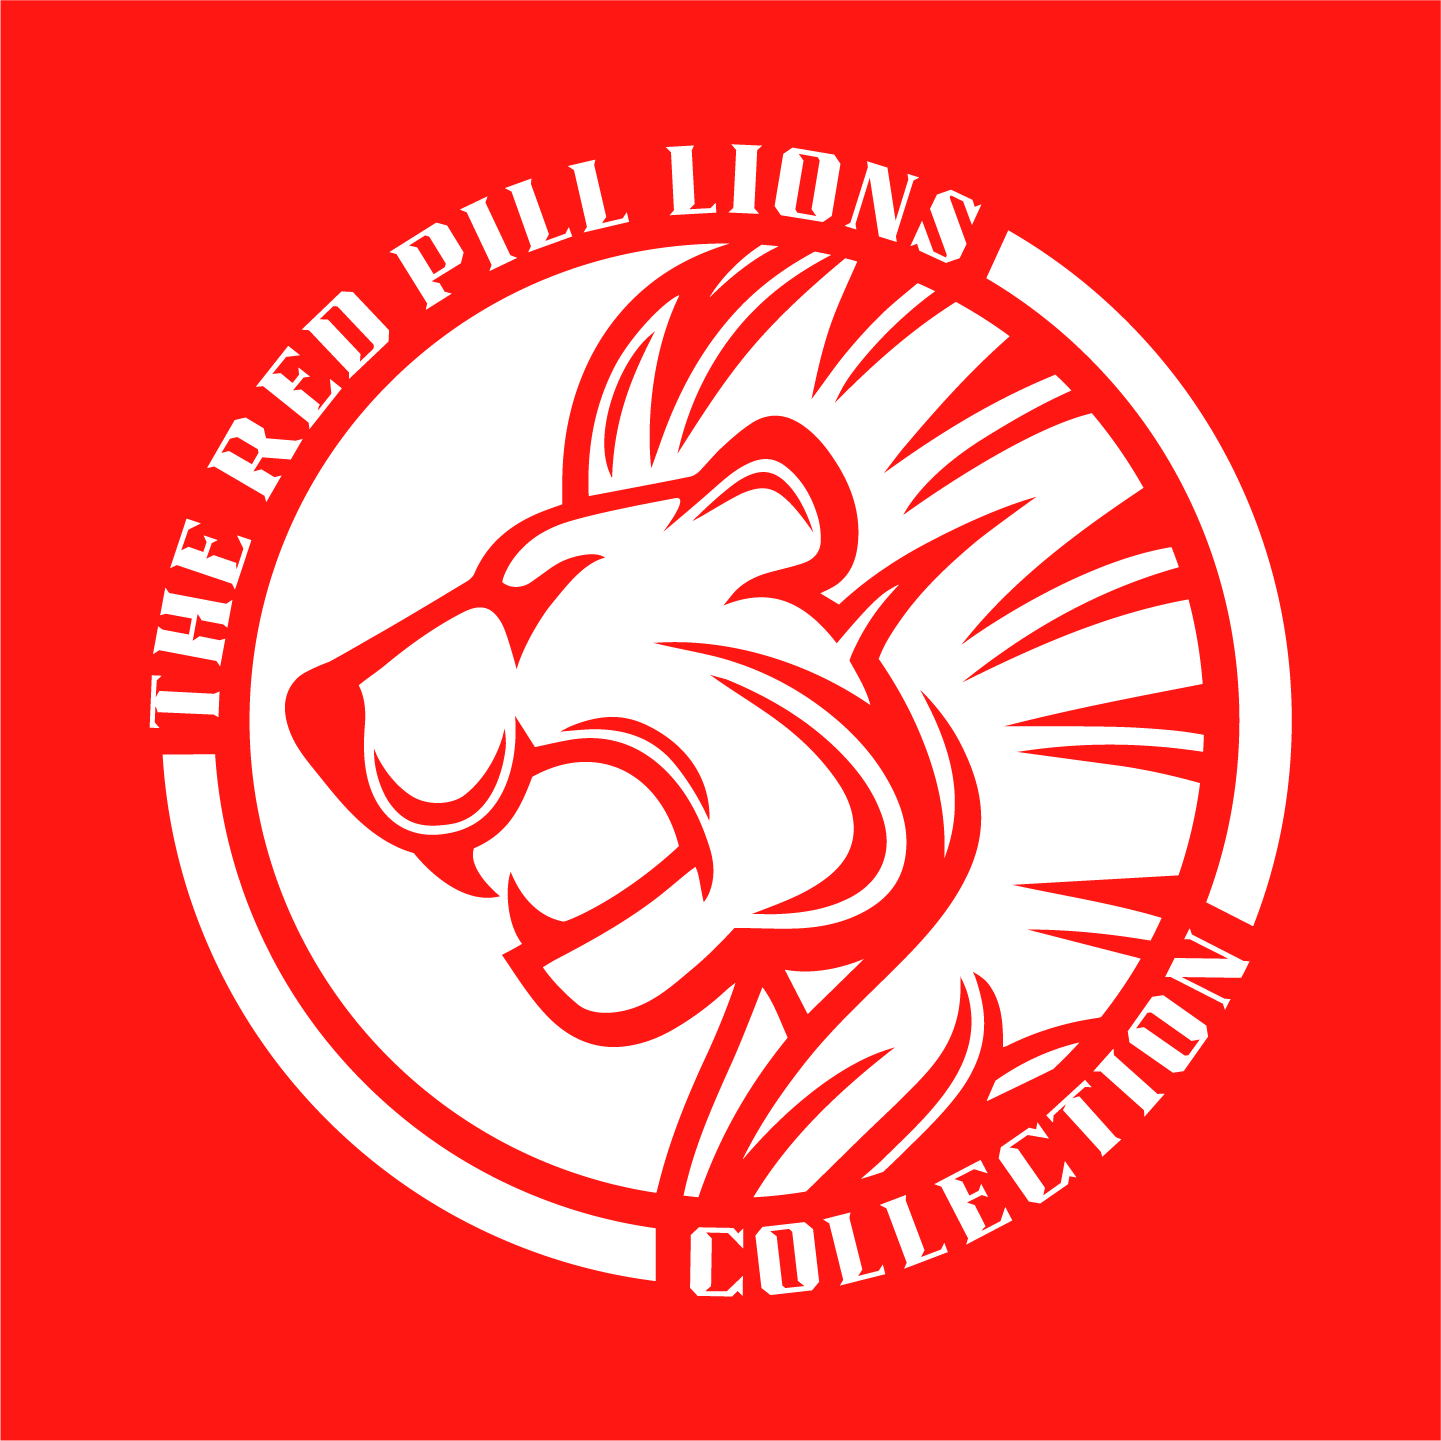 Red Pill Lions NFT Collection Staking